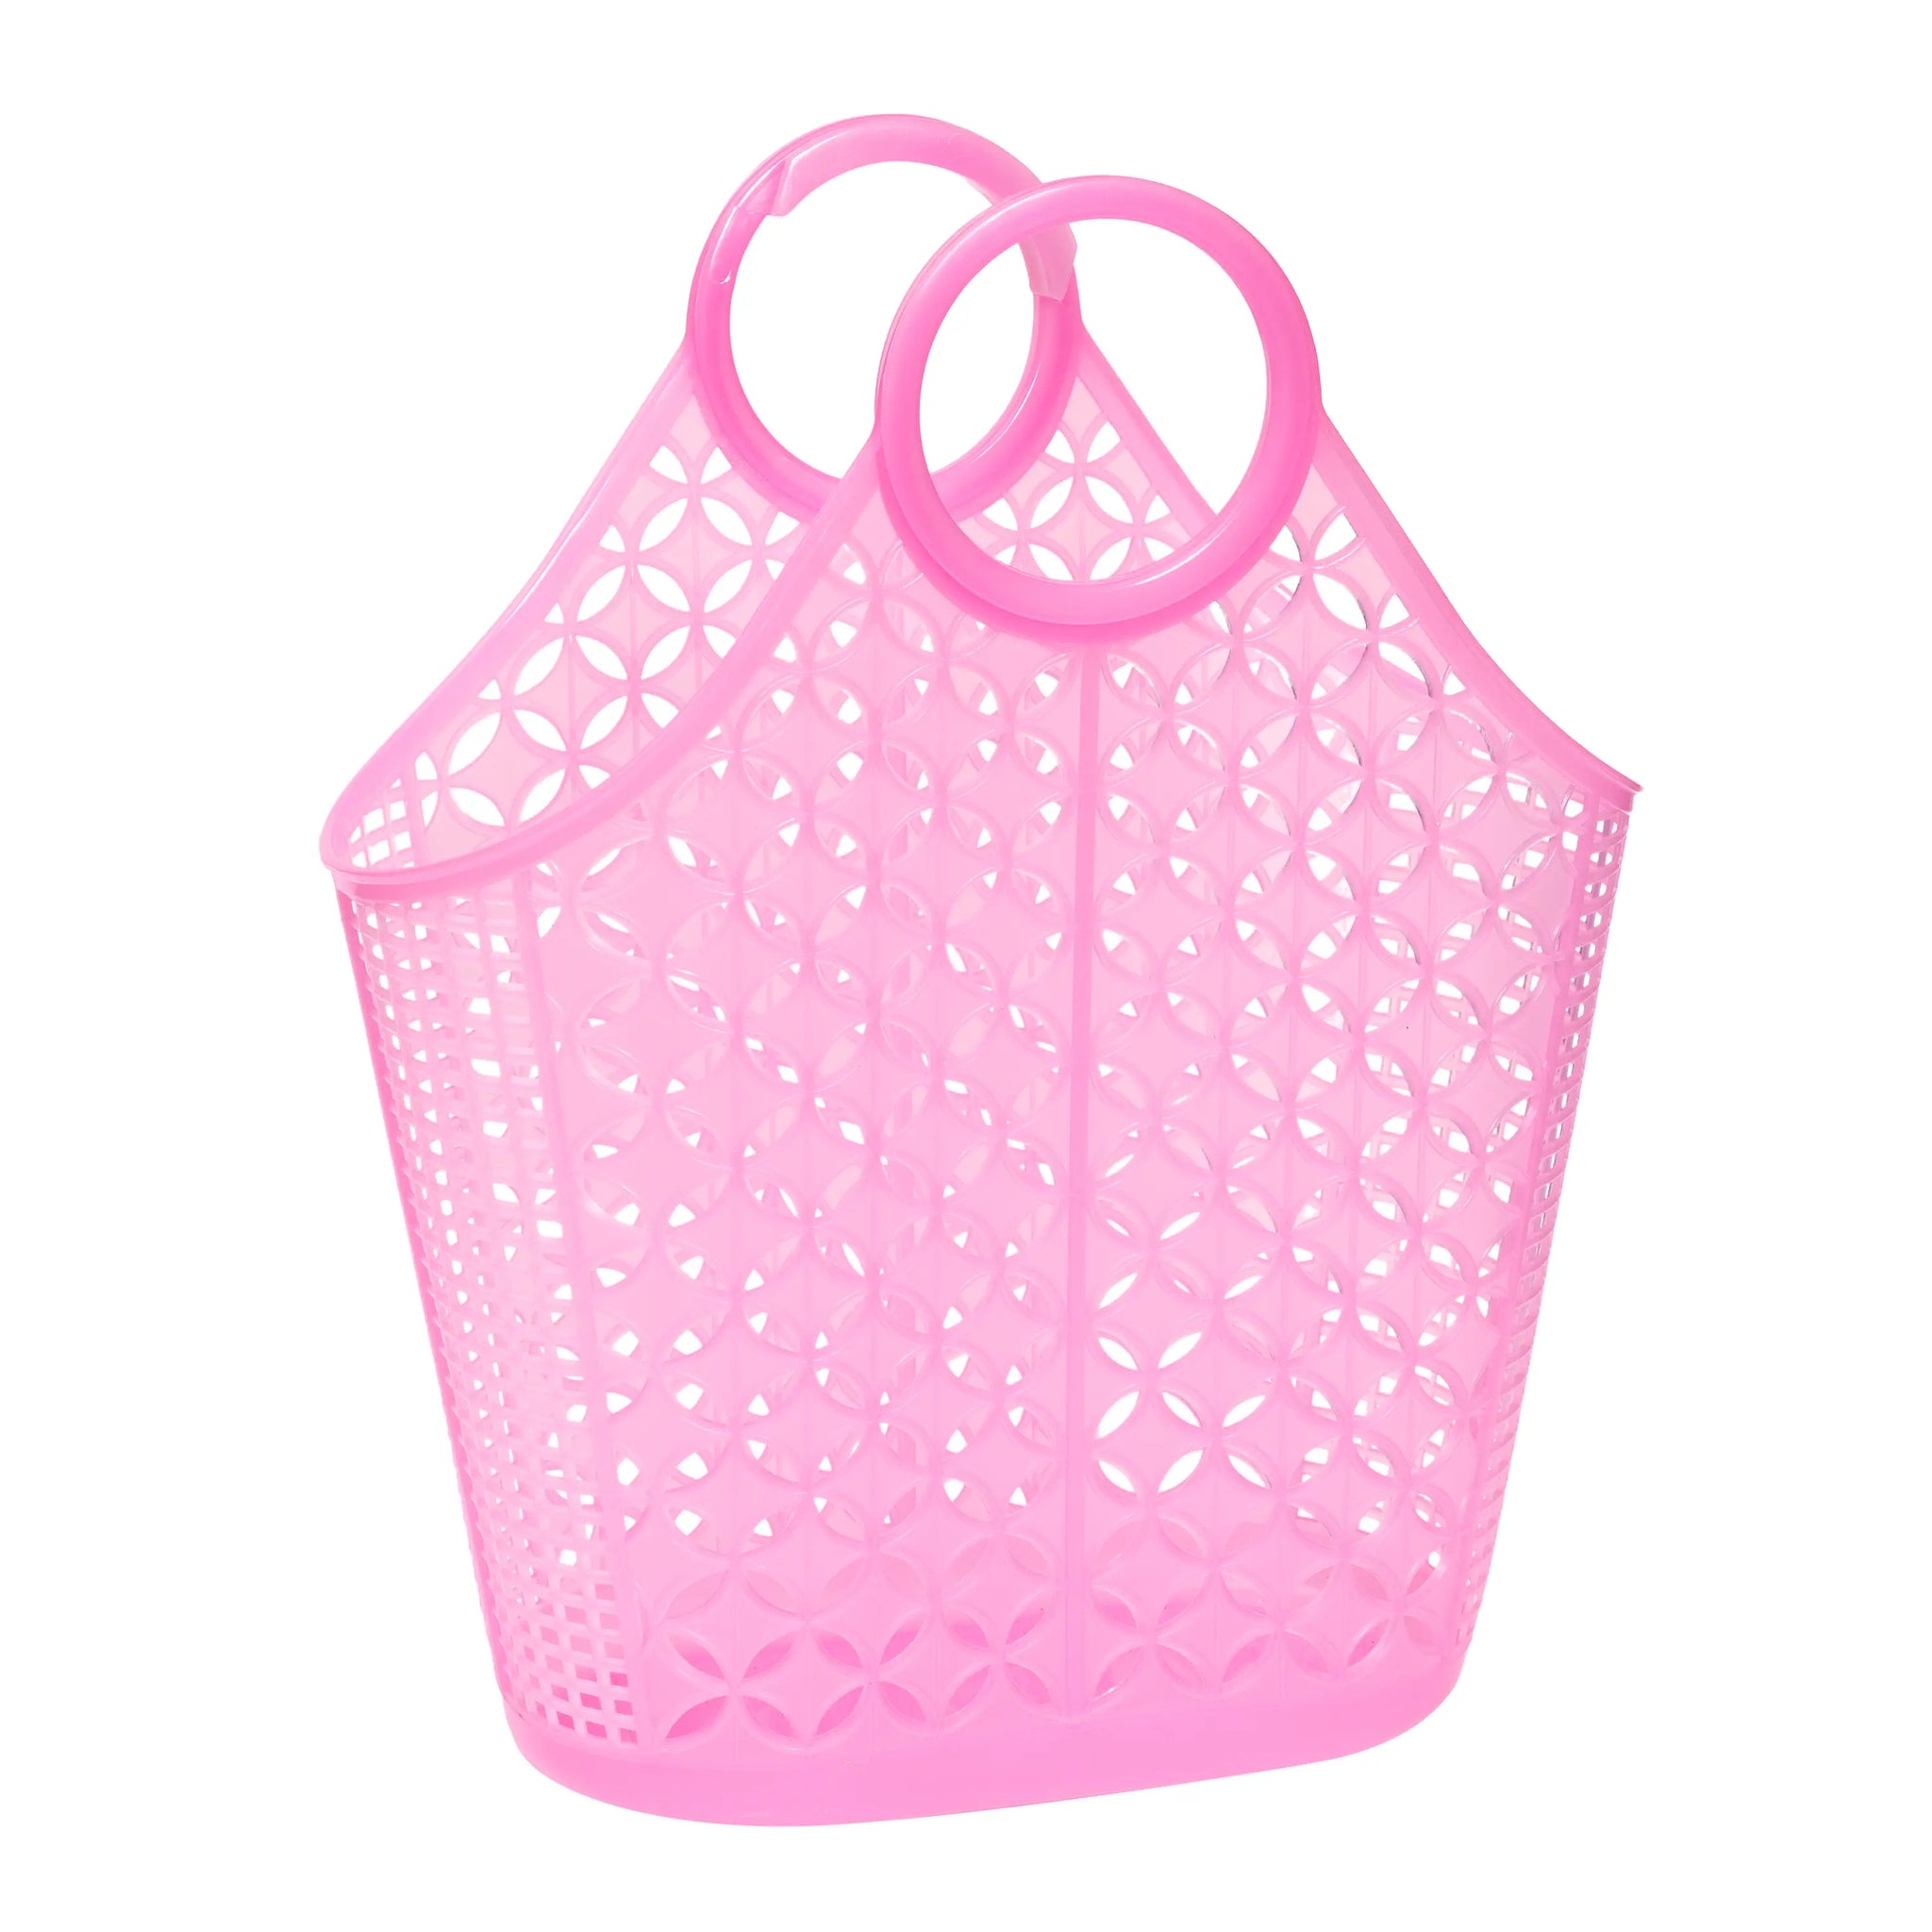 A large neon pink plastic purse with two round interlocking handles, a flat base, and a diamond and grid pattern